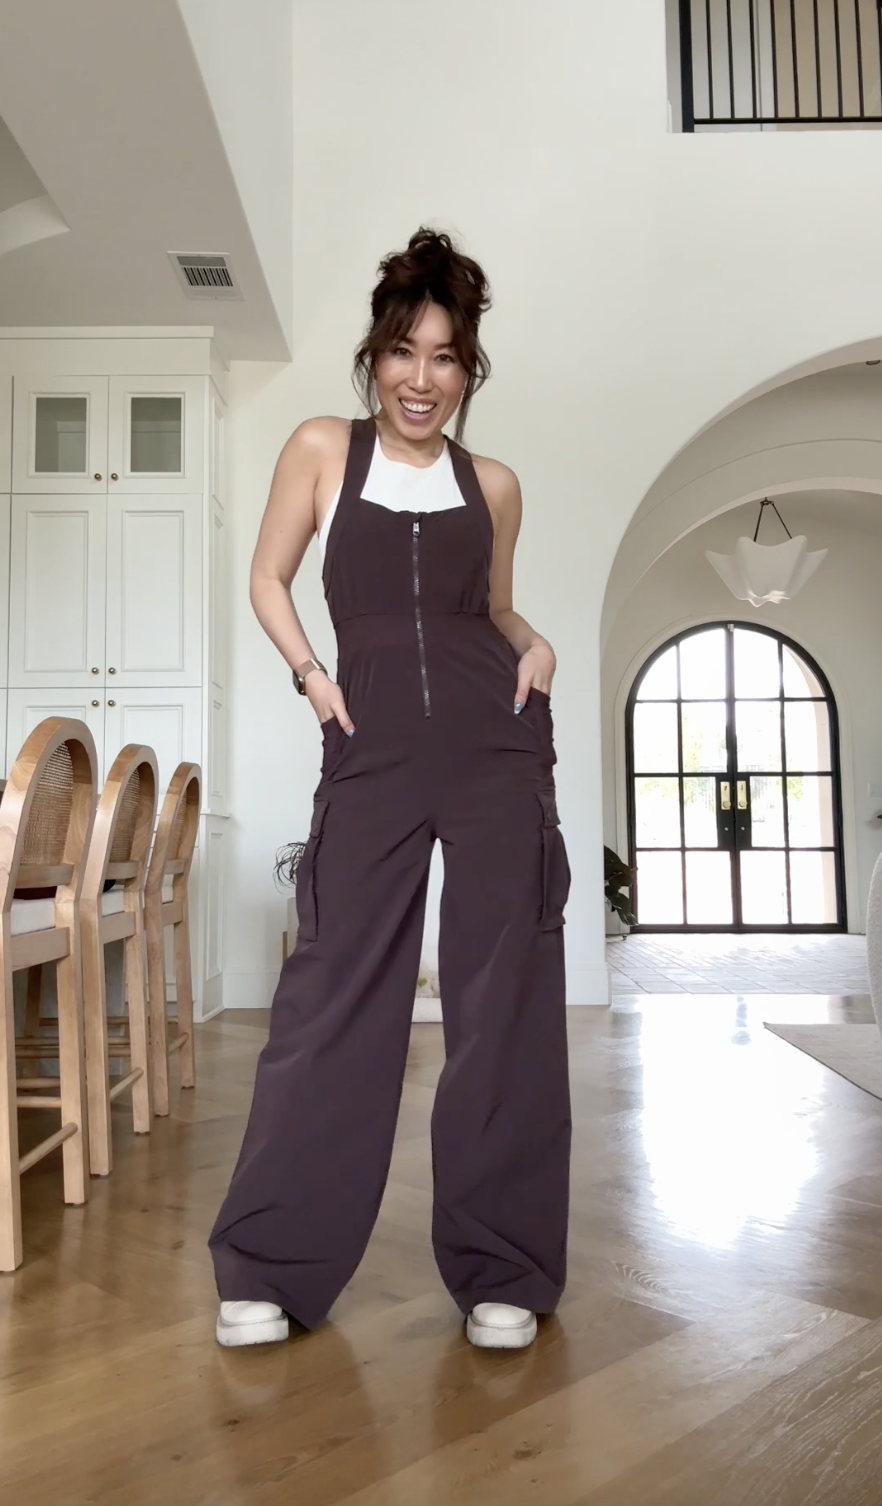 Putting myself in your hiking boots to design these overalls